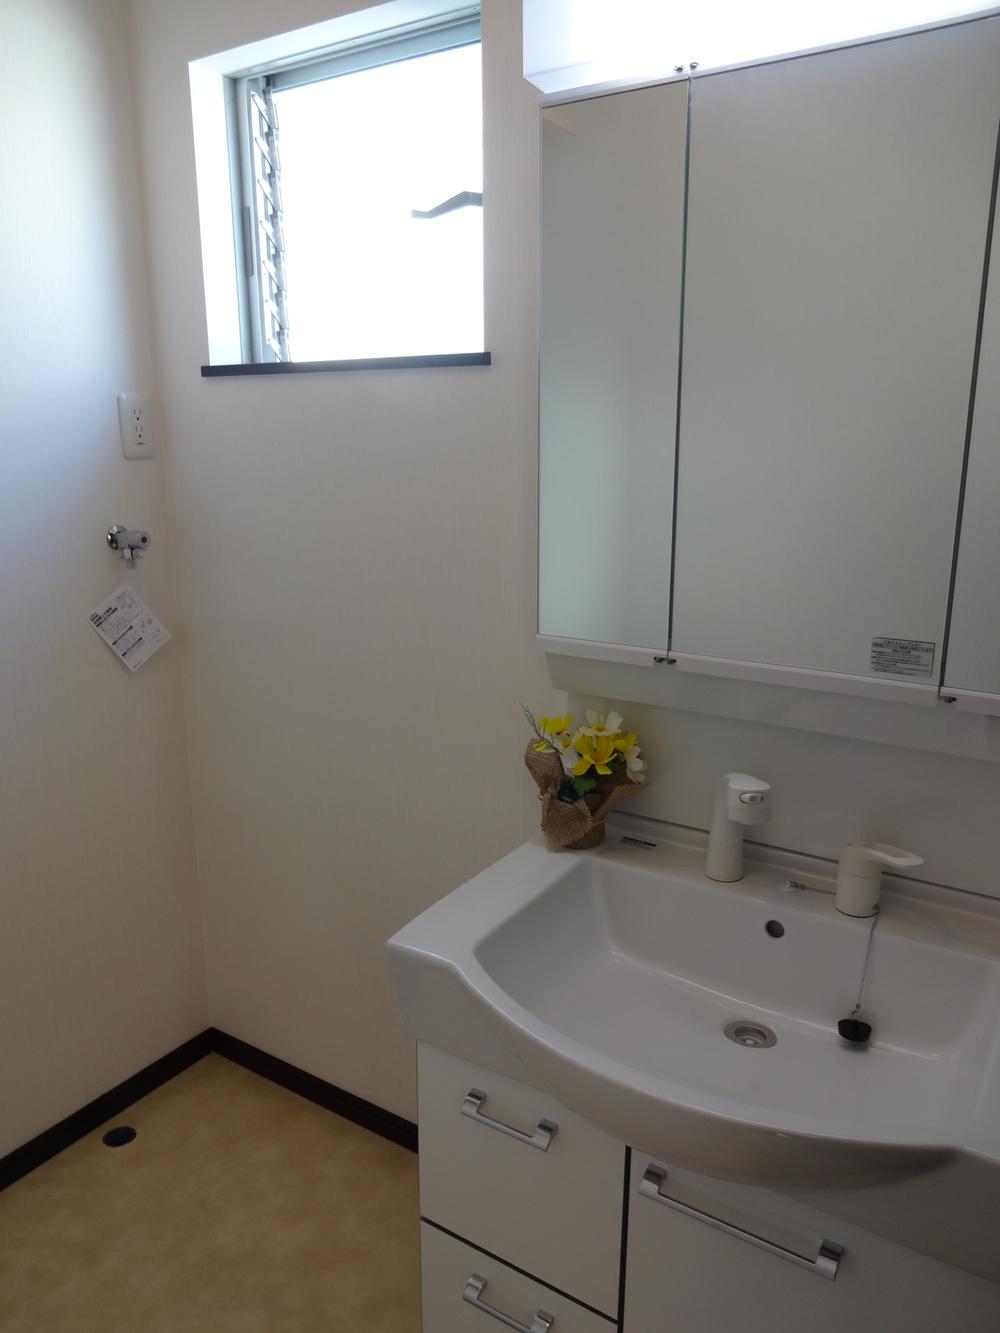 Wash basin, toilet. If there is a window is bright washroom. 